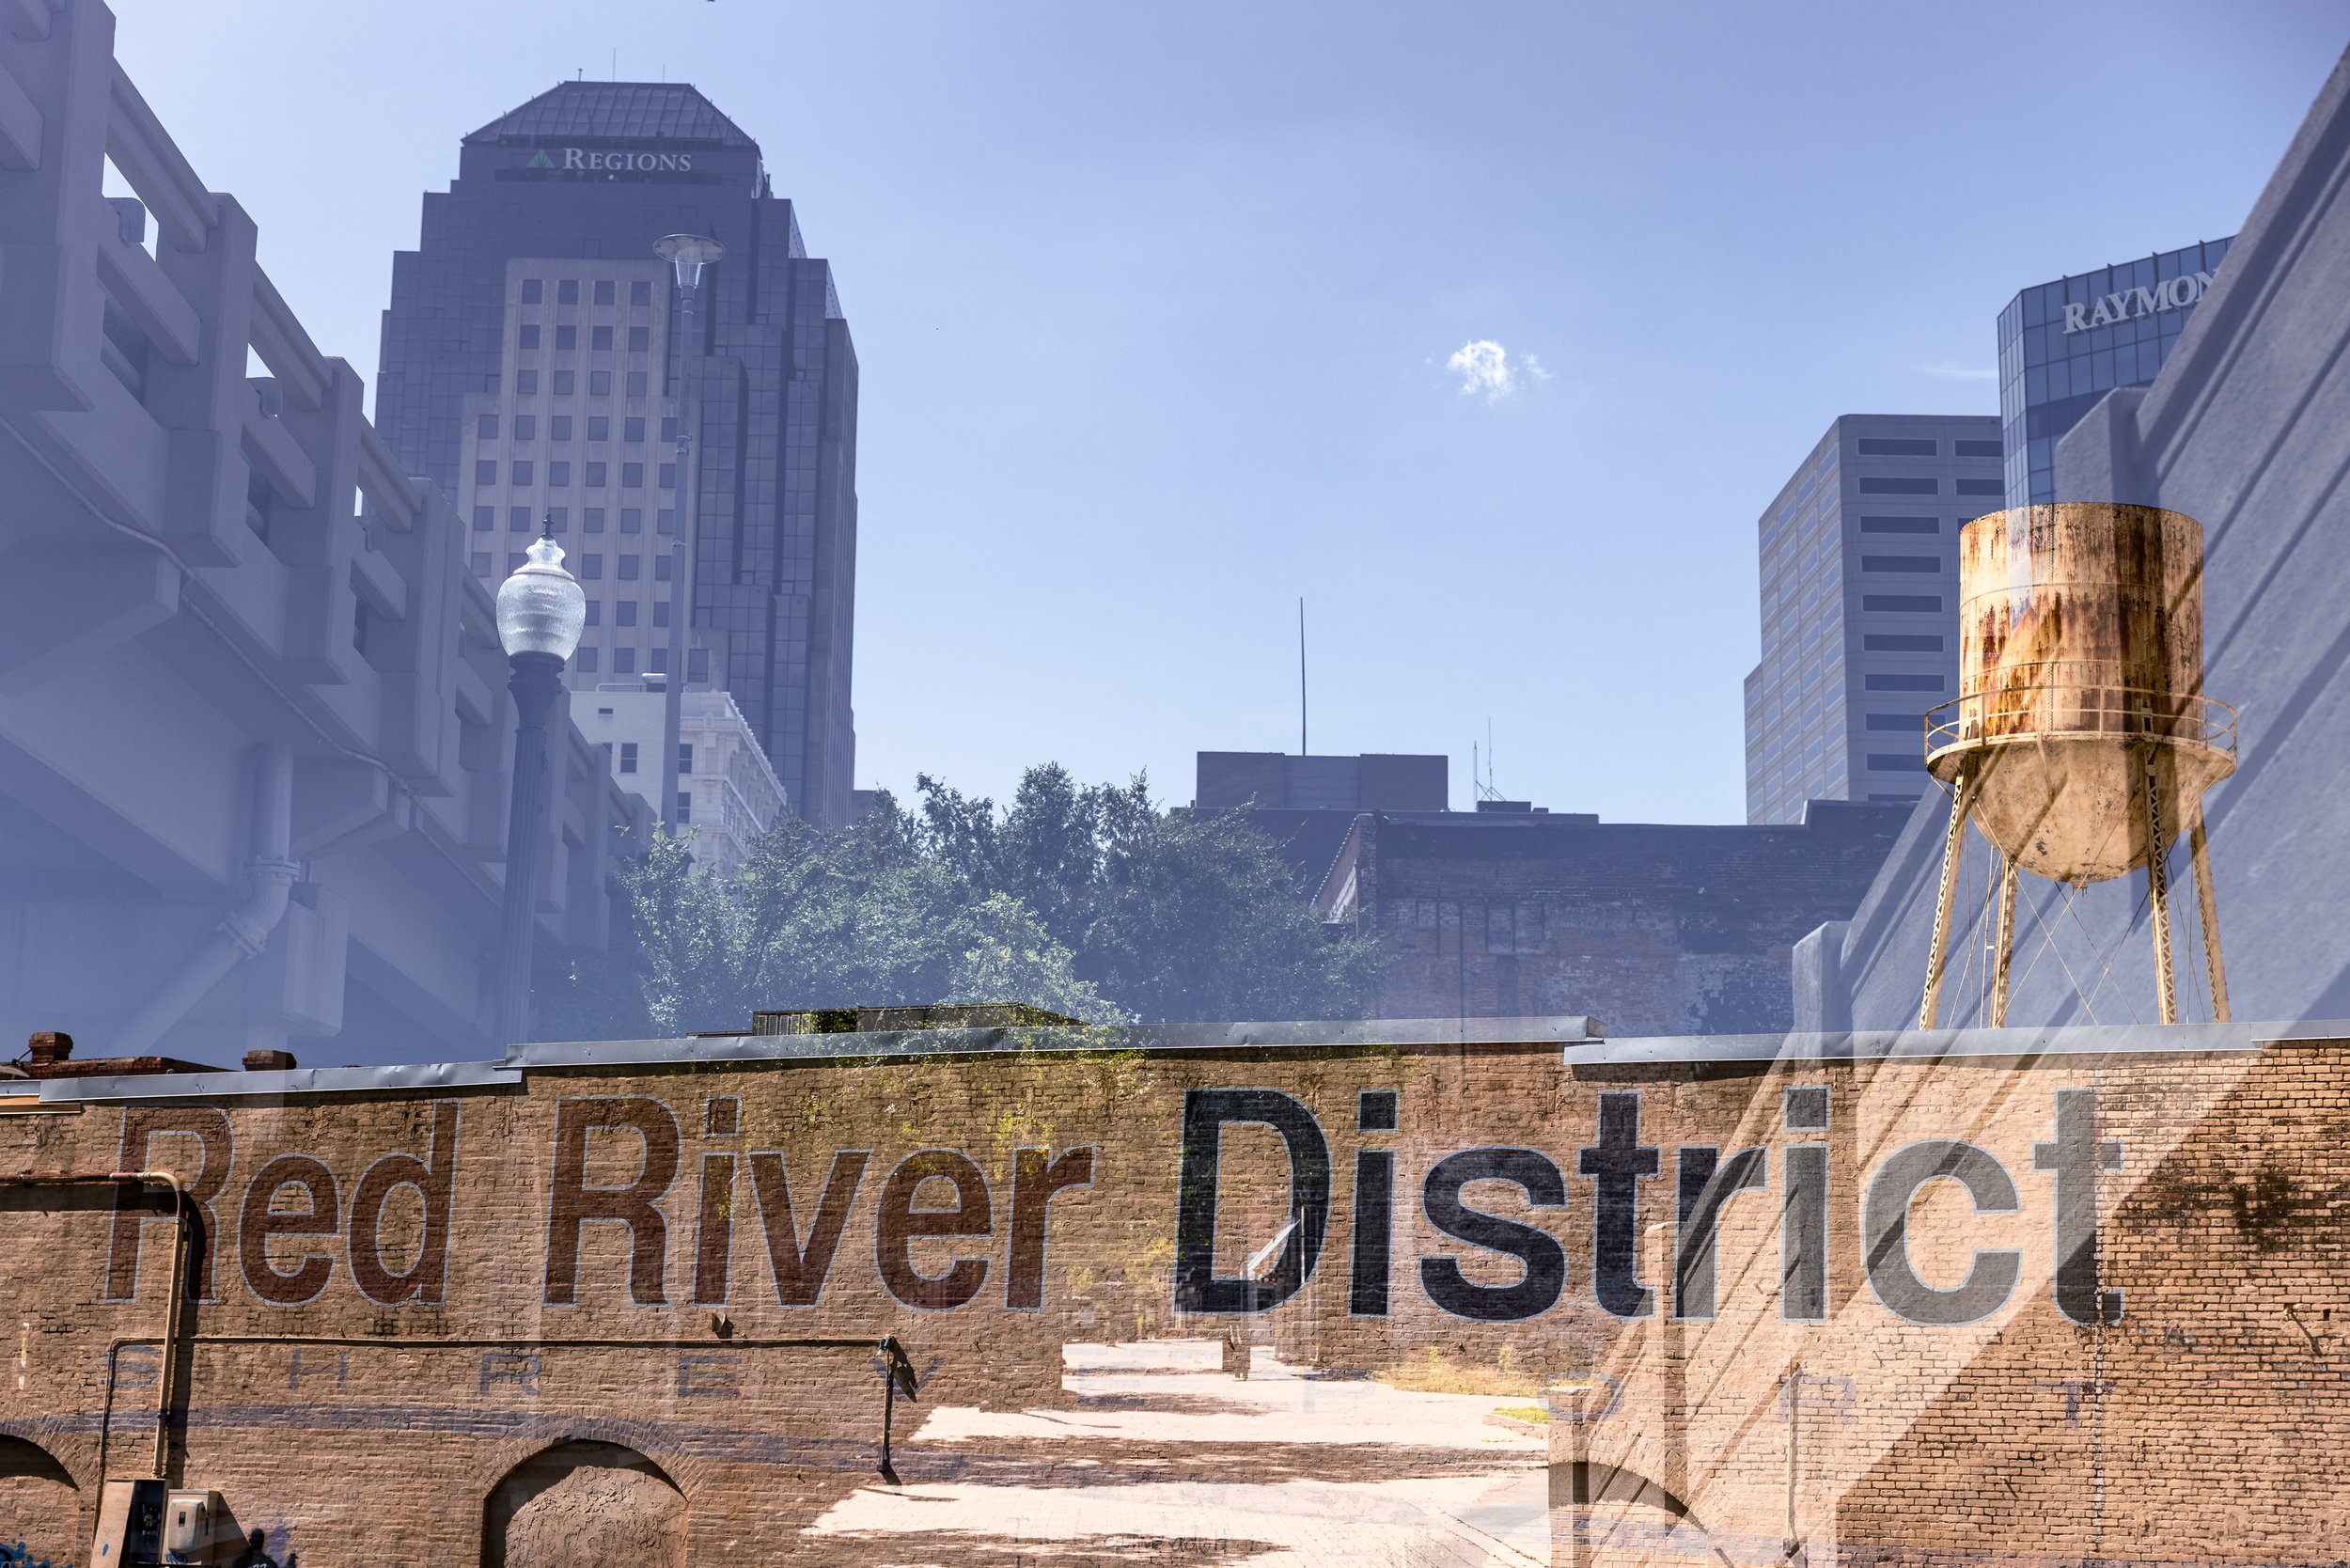 Two Sides of Red River District